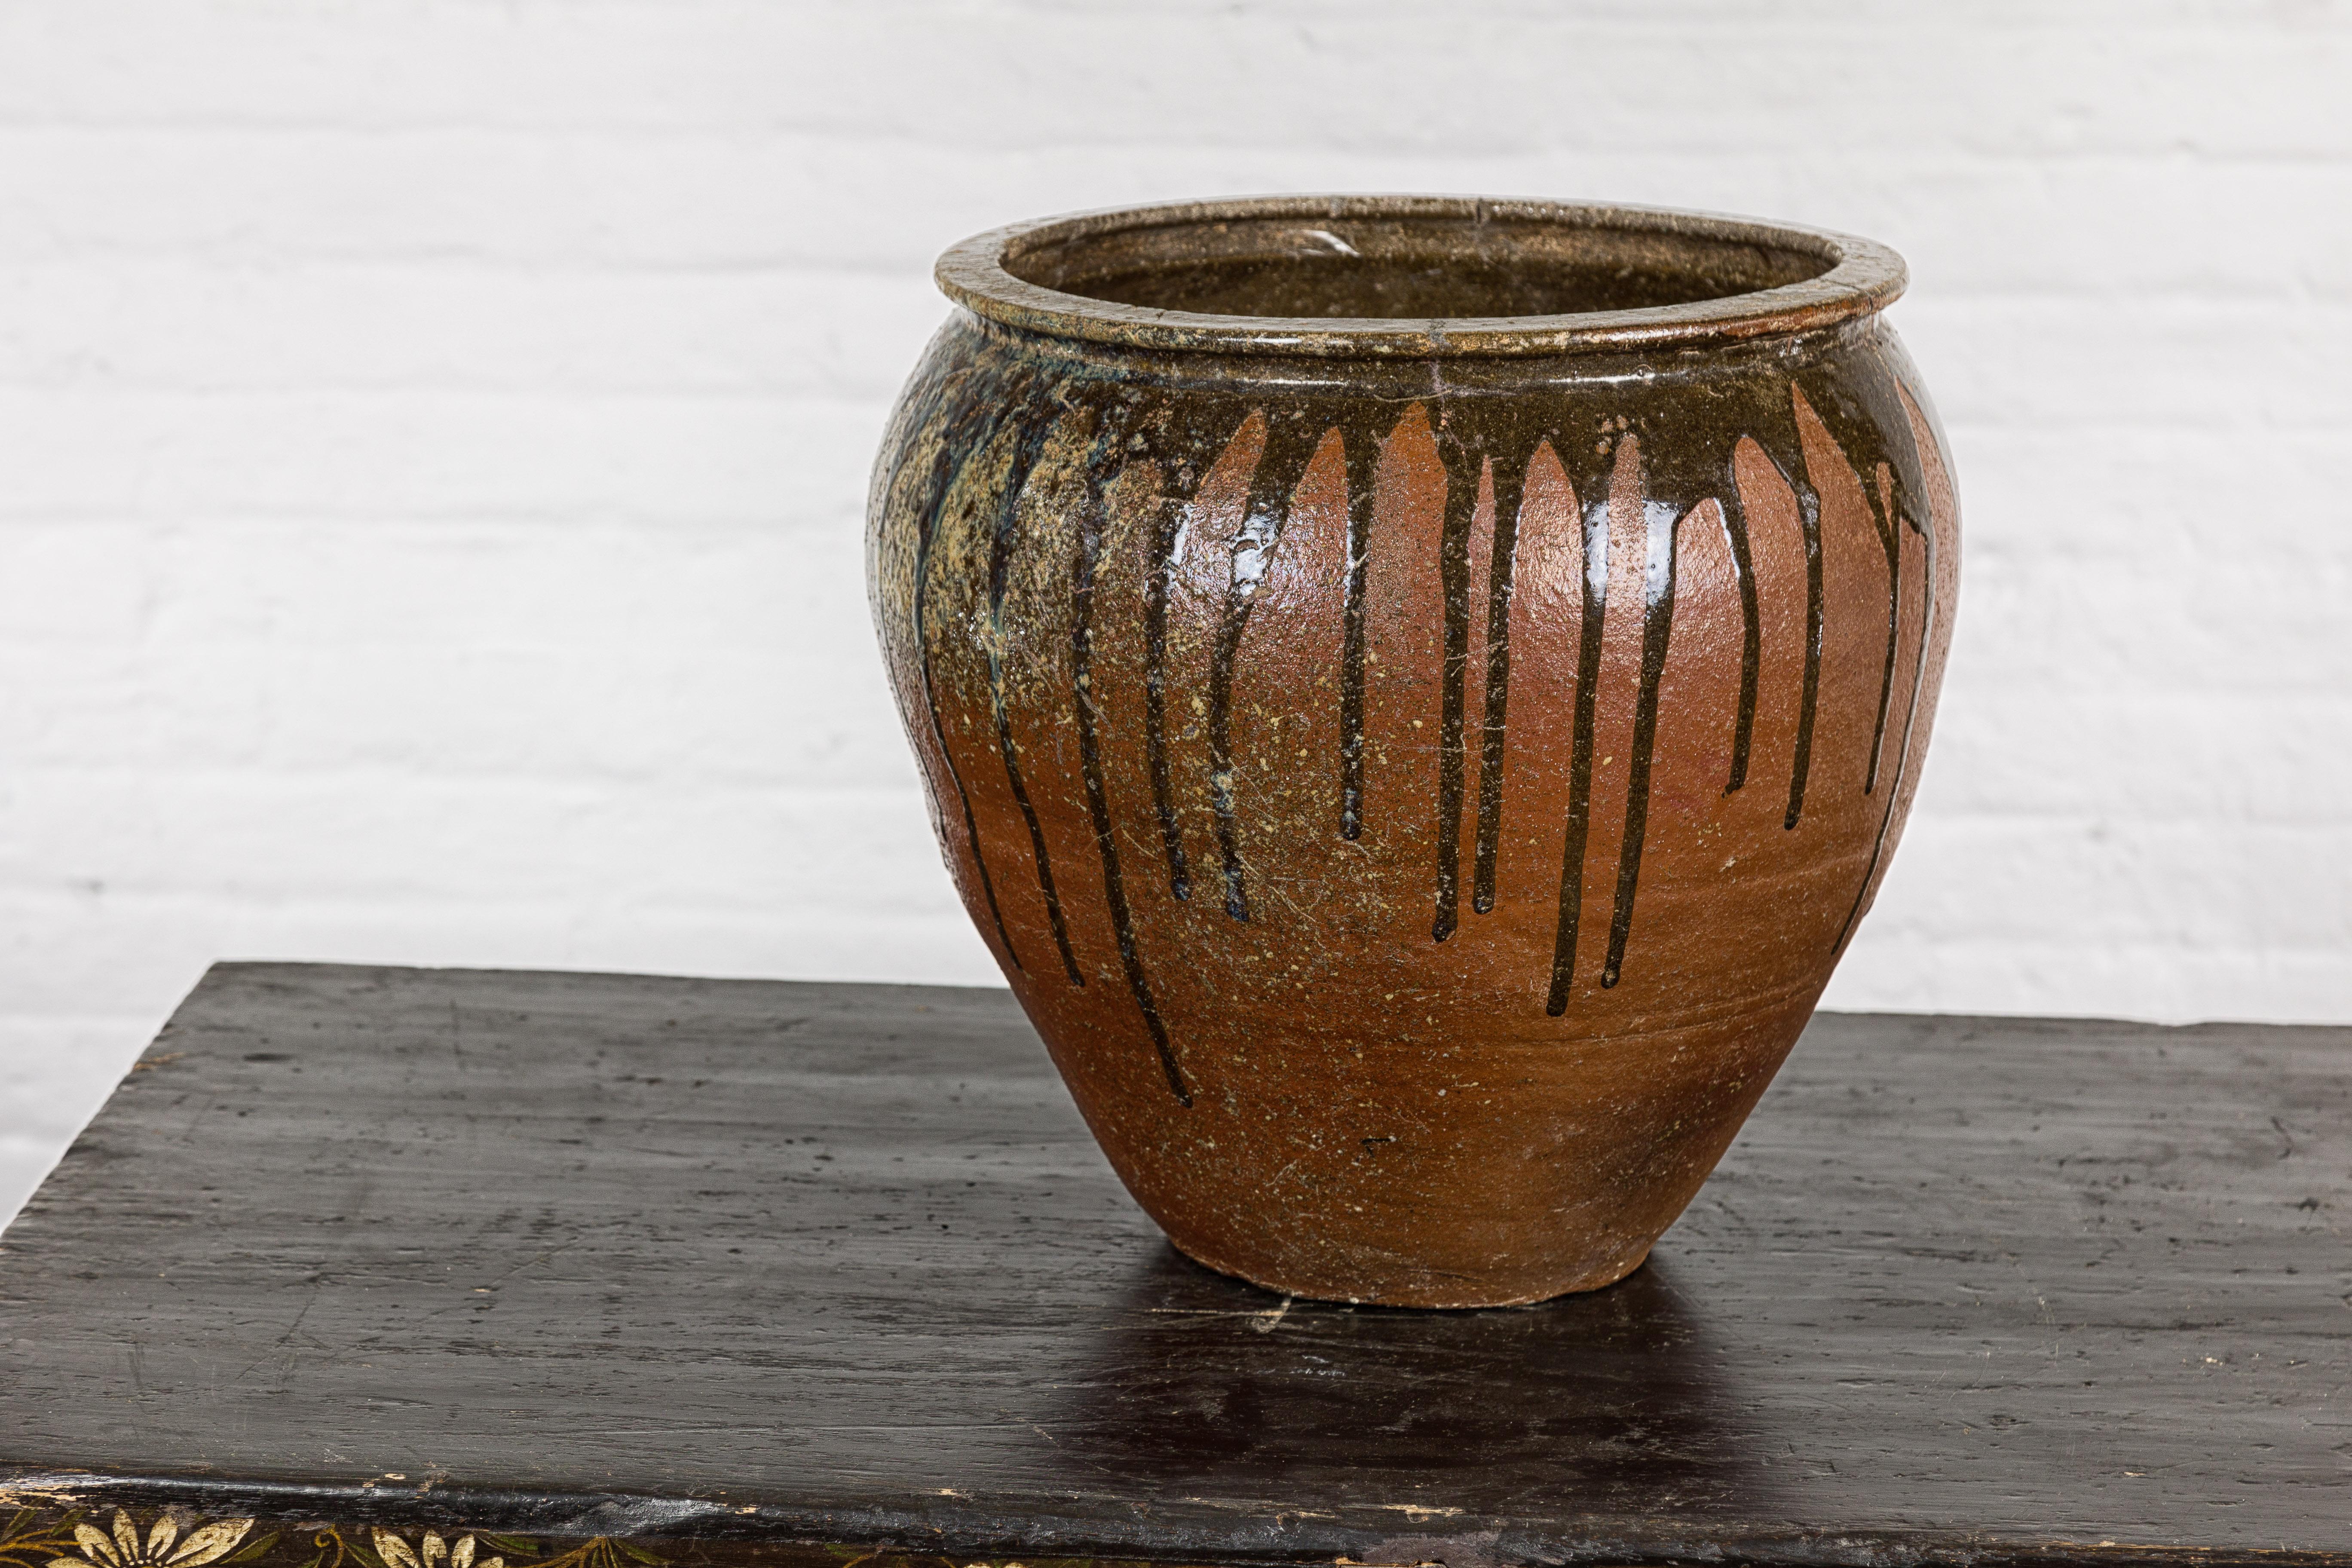 Japanese Tamba Ware Brown Glazed Ceramic Salt Pot Planter with Dripping For Sale 4